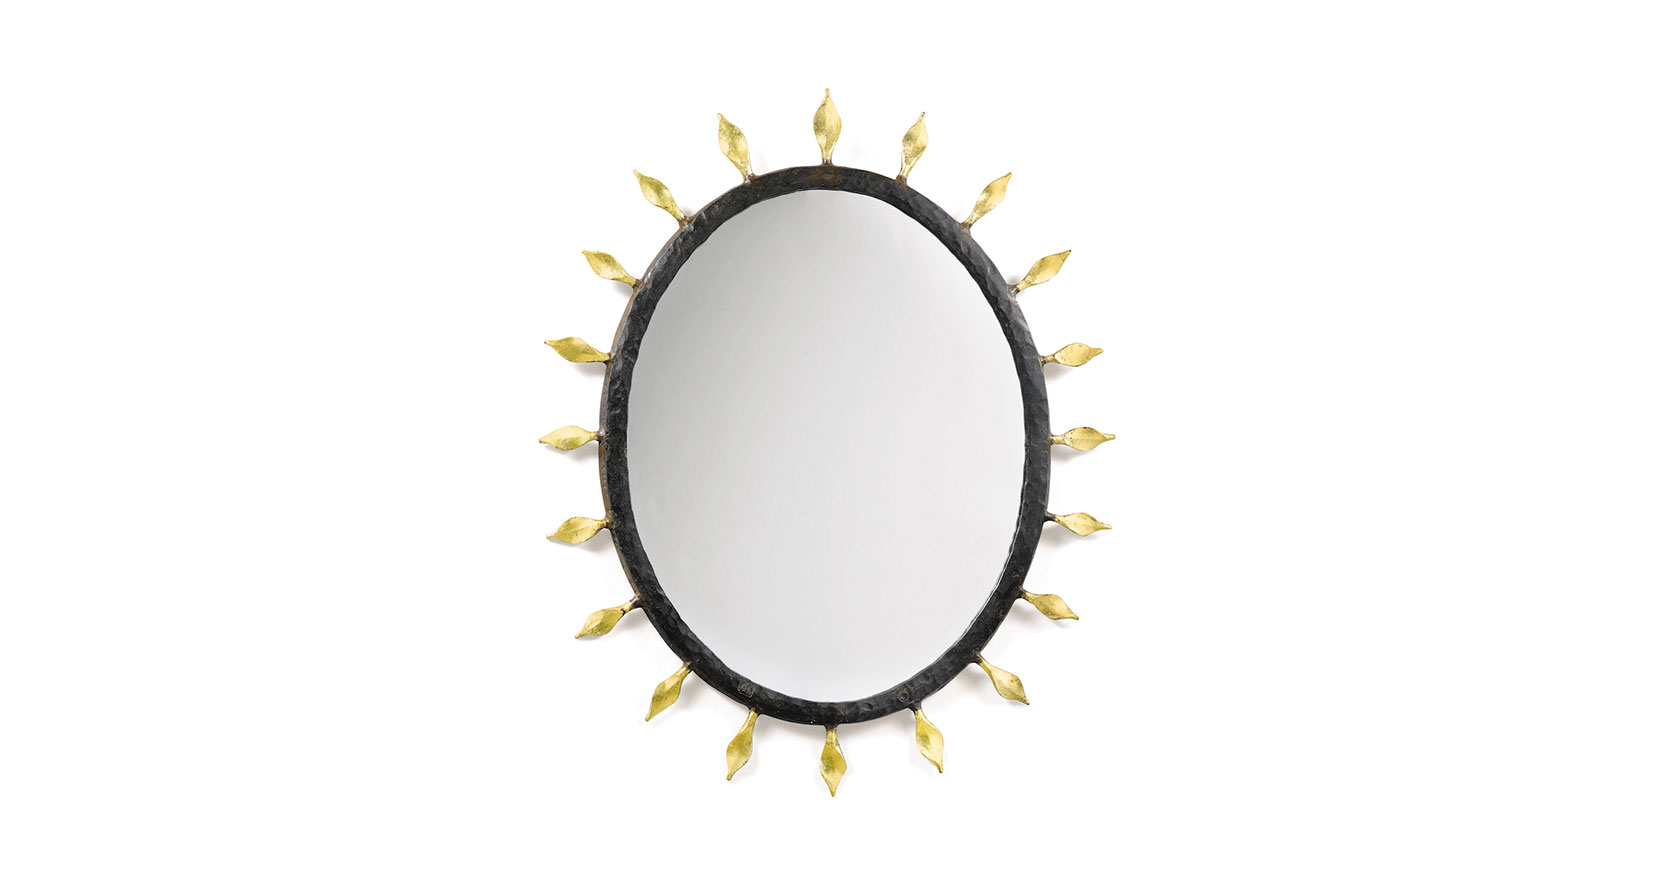 Garouste Bonetti, oval mirror, brown wrought iron frame surrounded by small golden wrought iron leaves